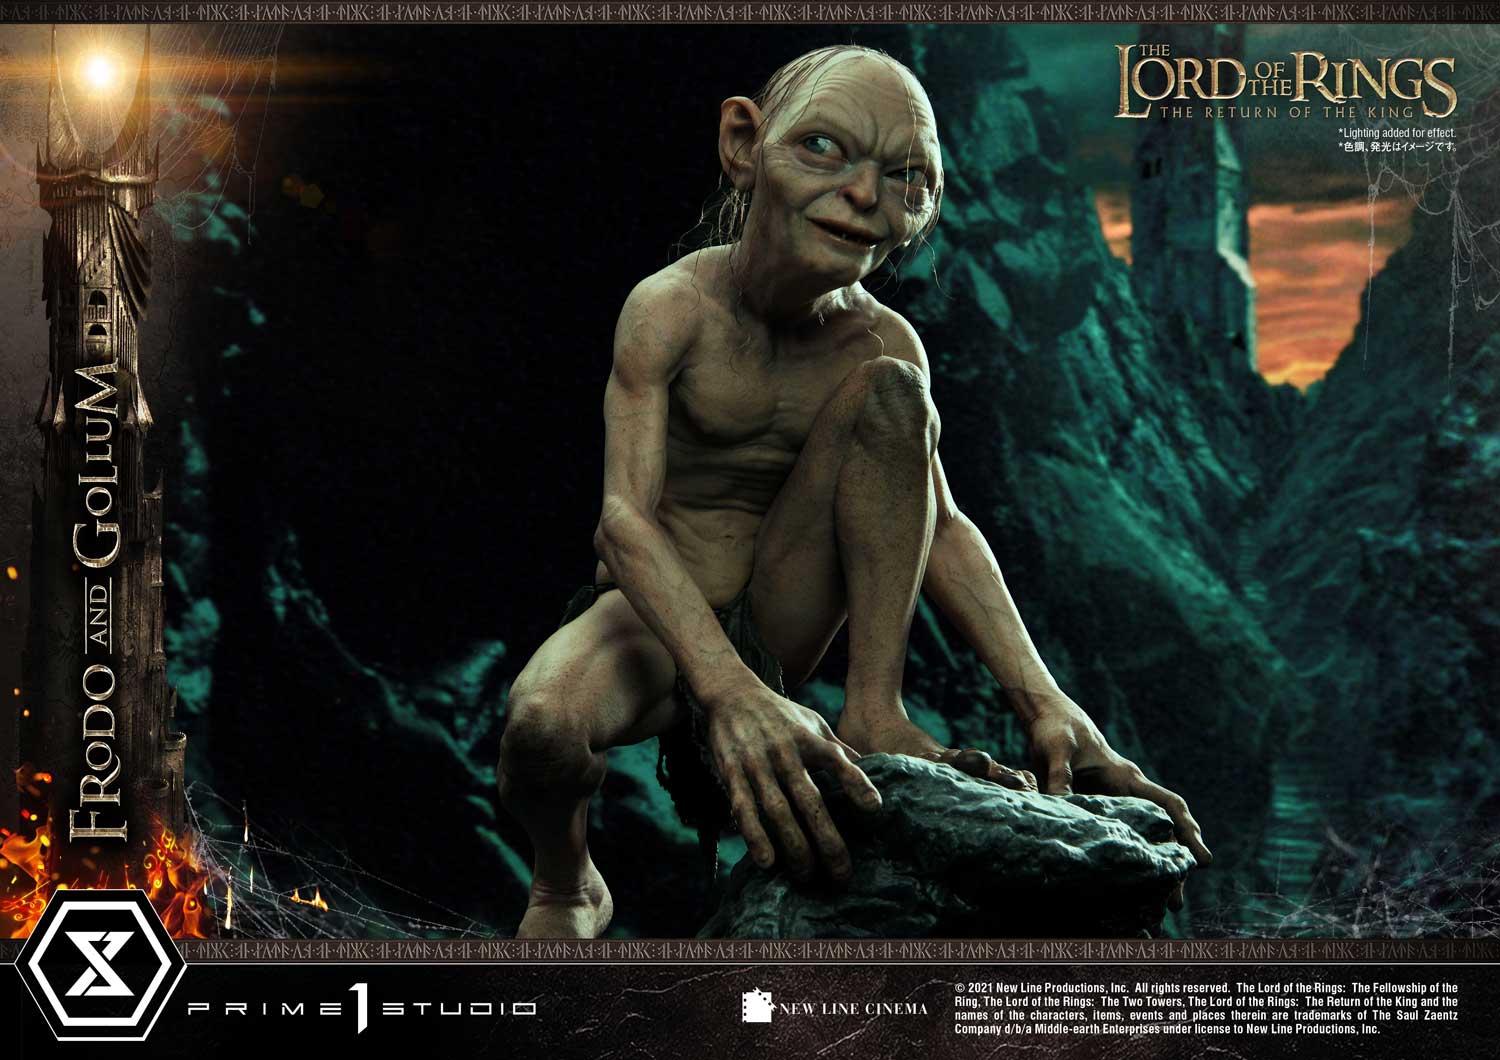 golem lord of the rings wallpaper